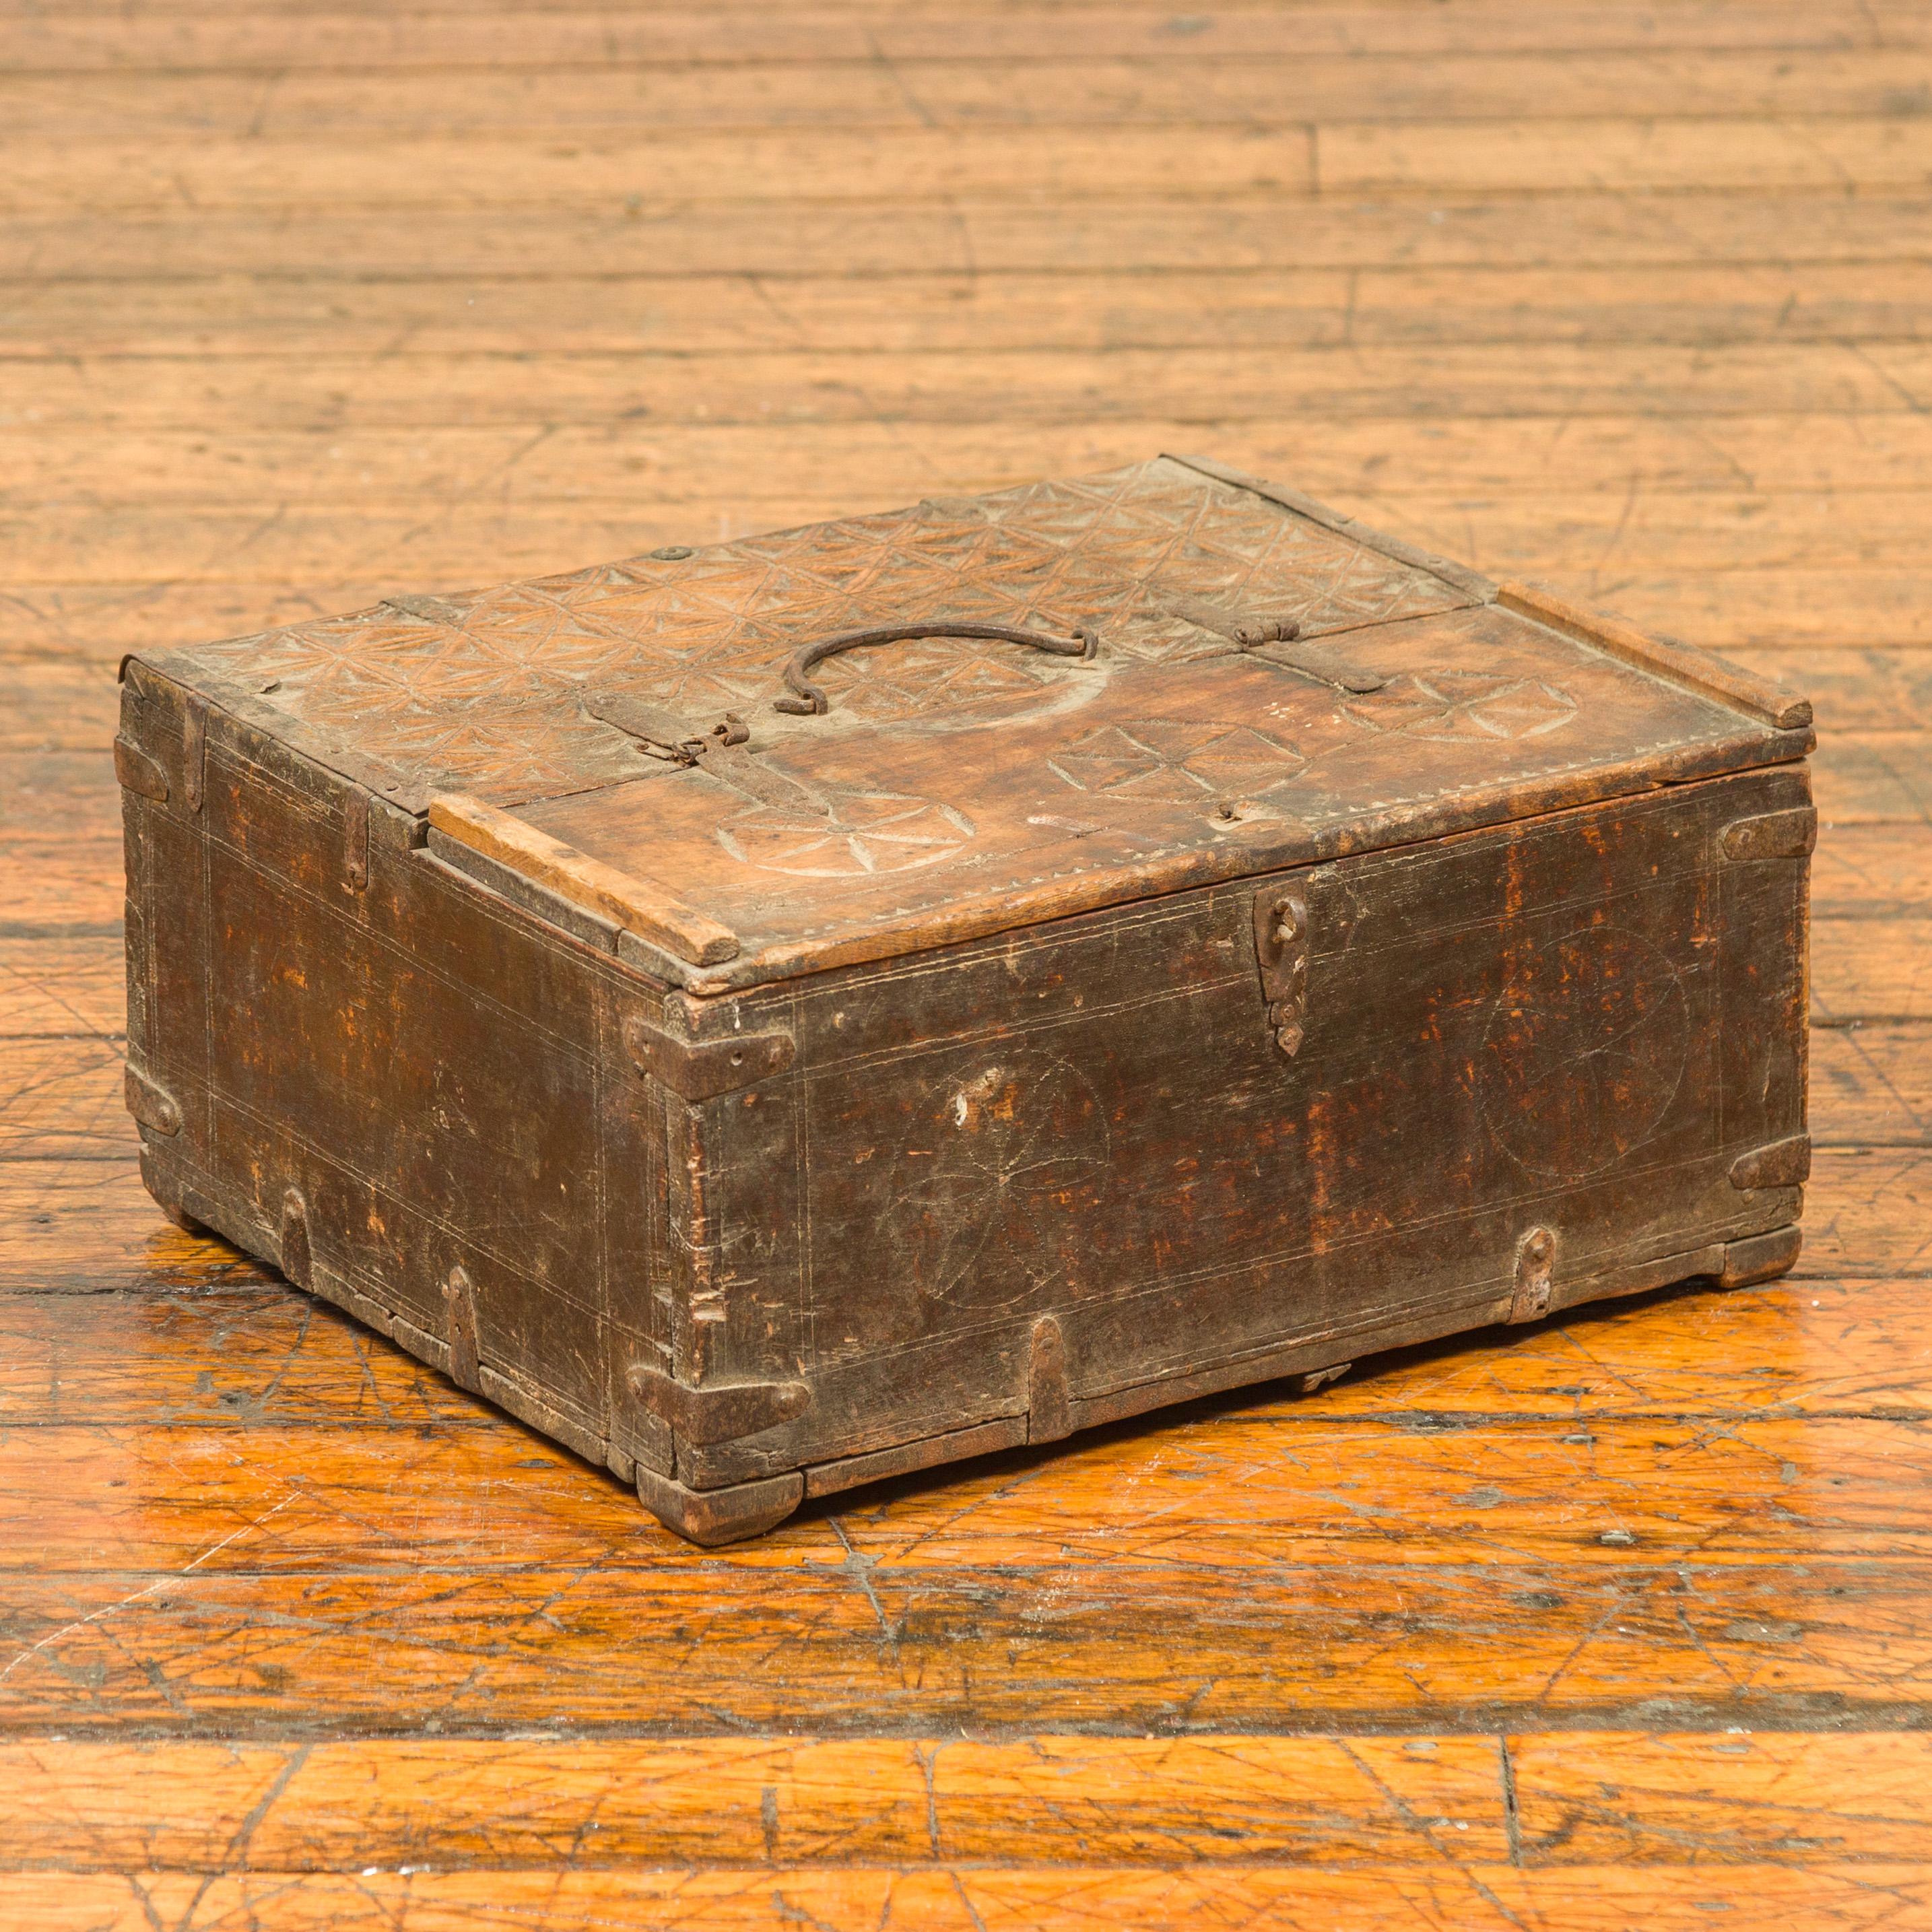 An antiue Indian wooden dowry box used by a merchant, with geometric design. Charming us with its weathered appearance and subtle geometric design, this dowry box showcases a rectangular top carved with geometric diamond and rosette motifs, and